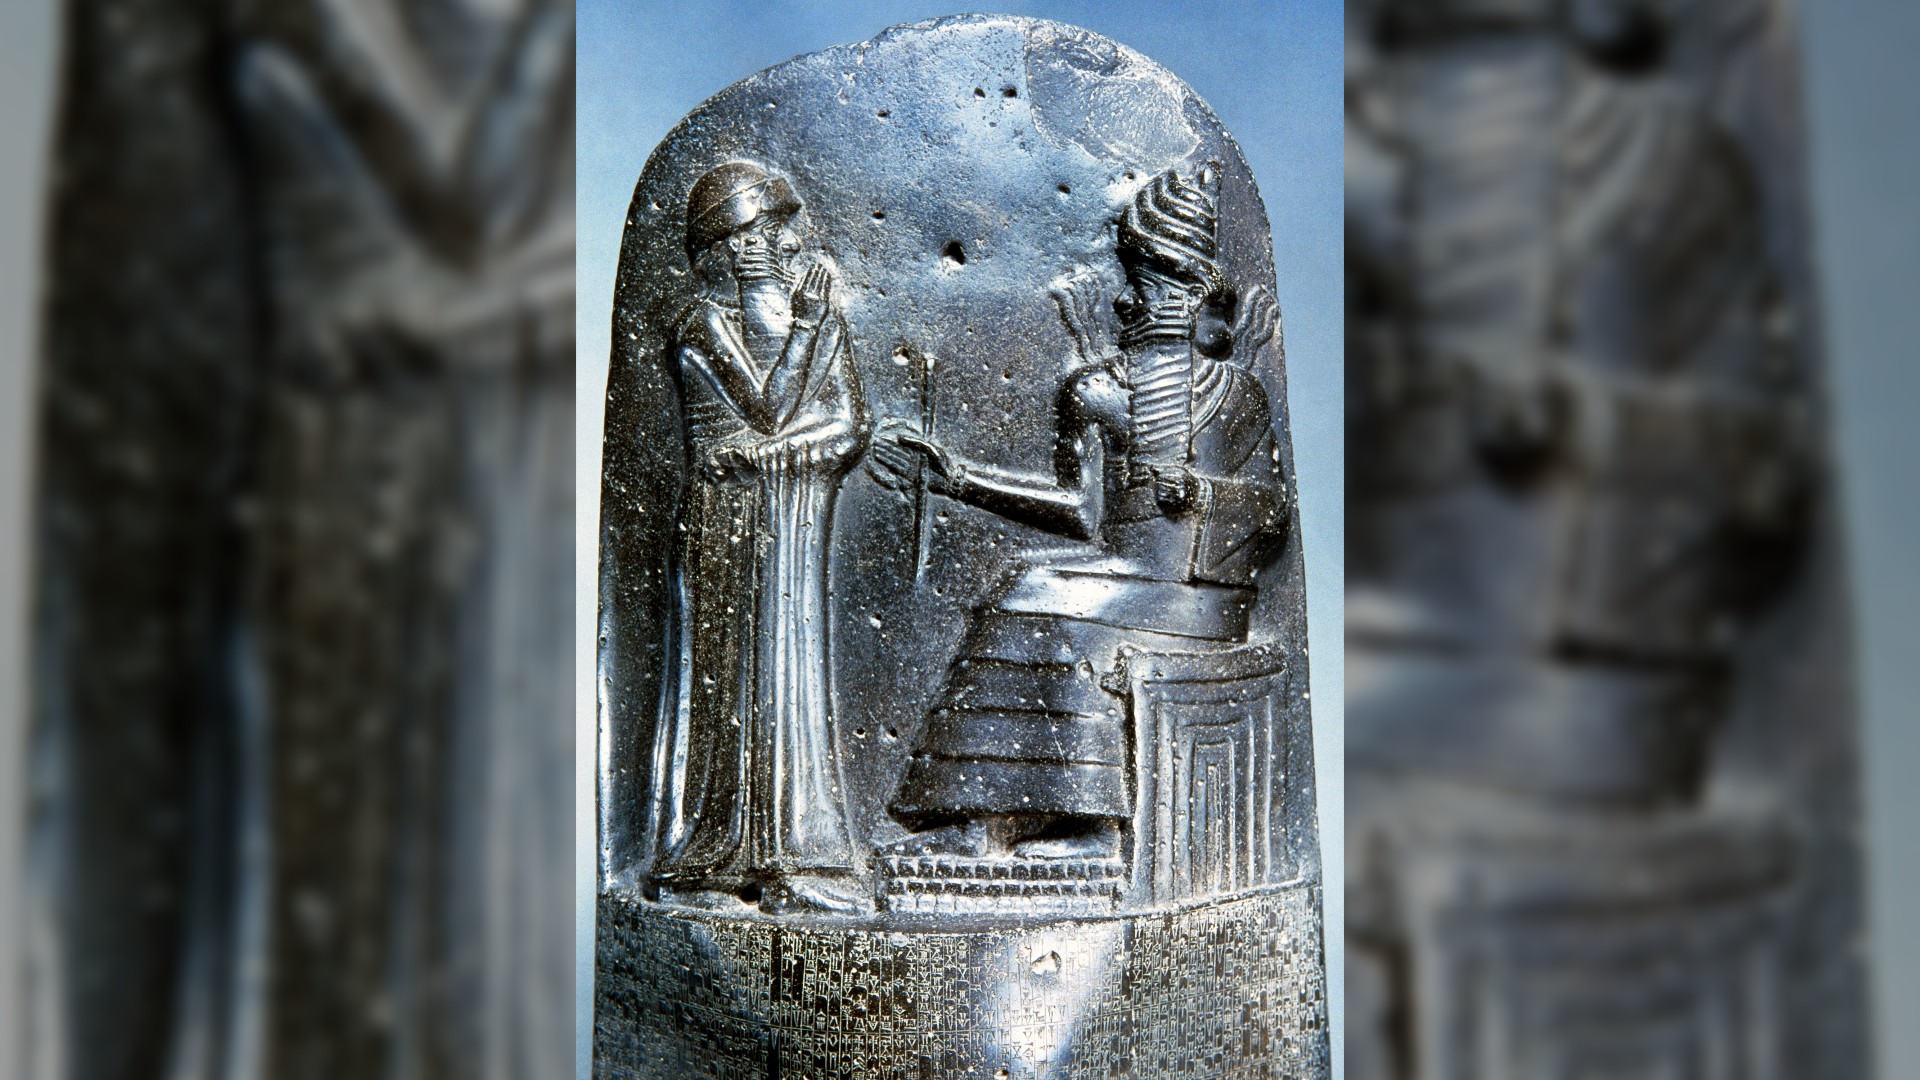 Hammurabi (standing), king of Babylon, depicted as receiving his royal insignia from Shamash, god of justice.